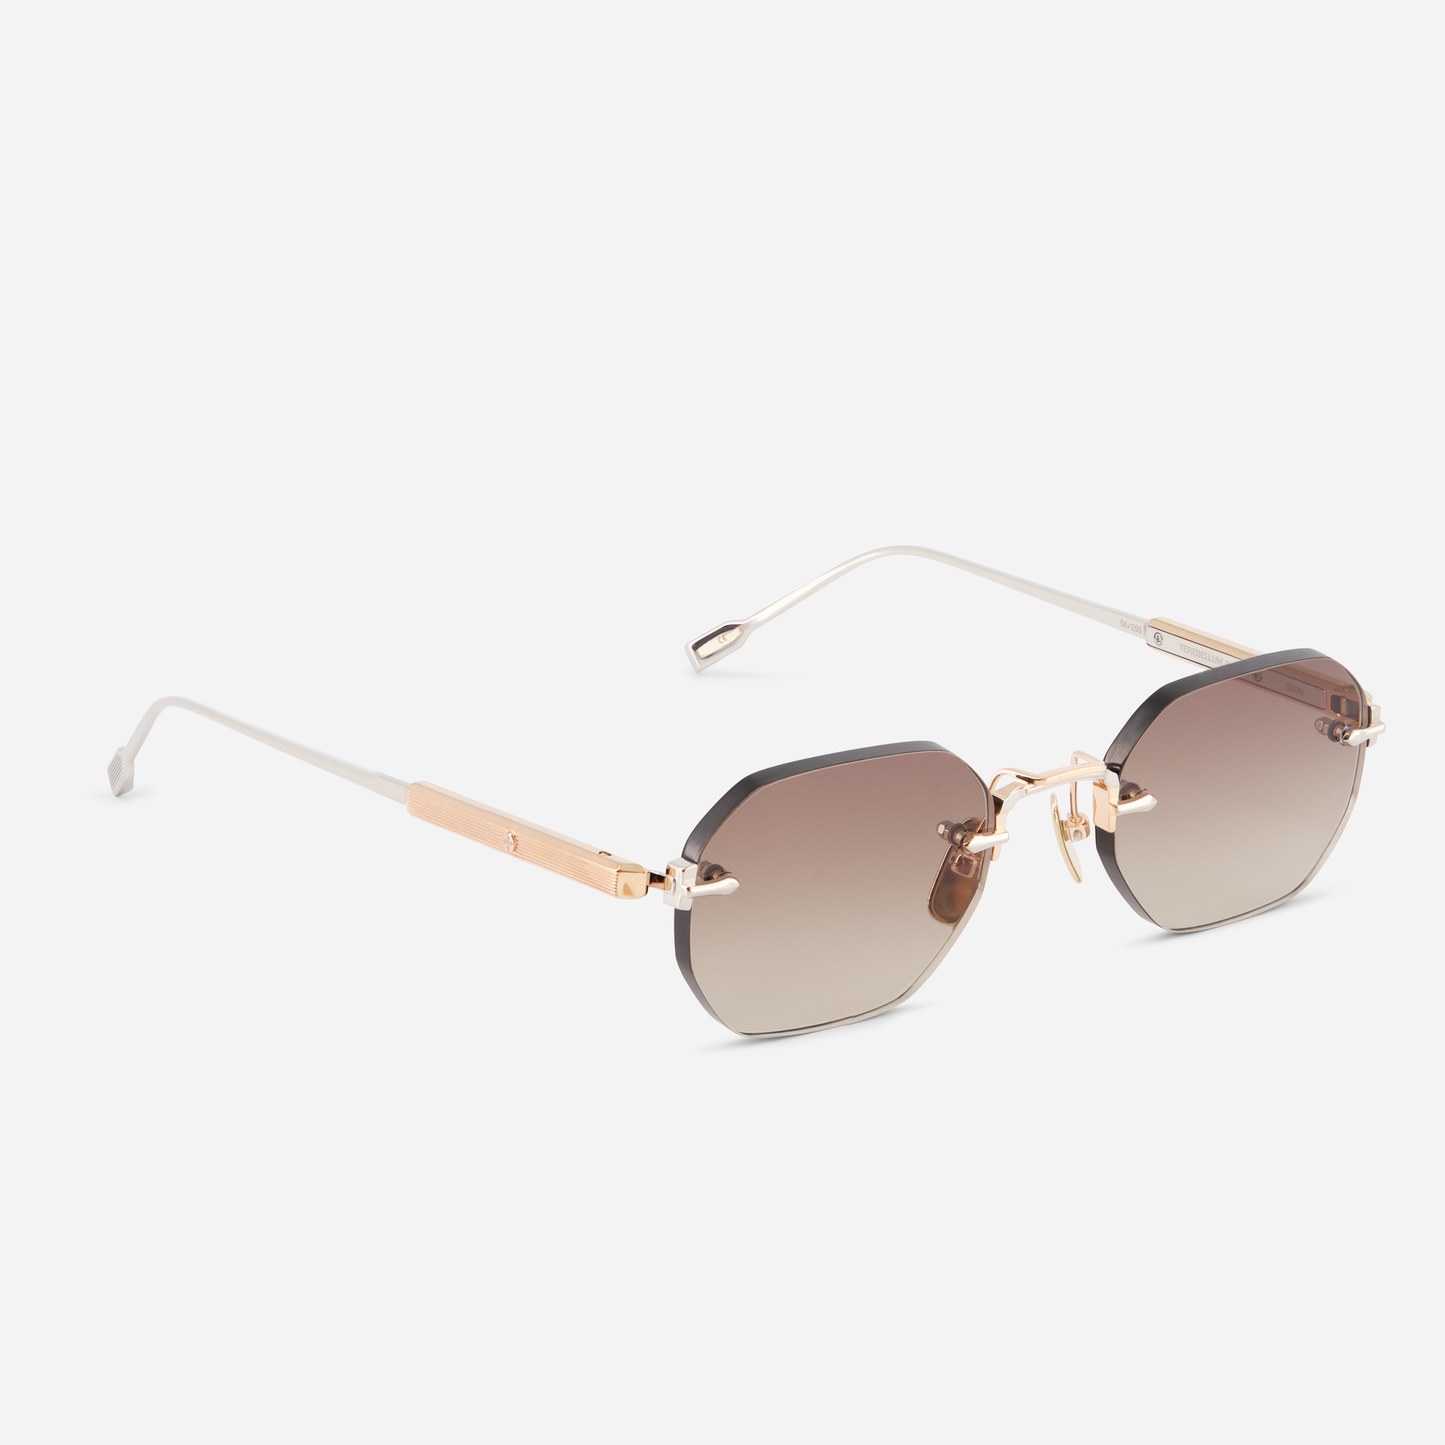 e Terebellum II S704, featuring a rimless silhouette, rose gold and platinum accents, and gradient brown lenses.